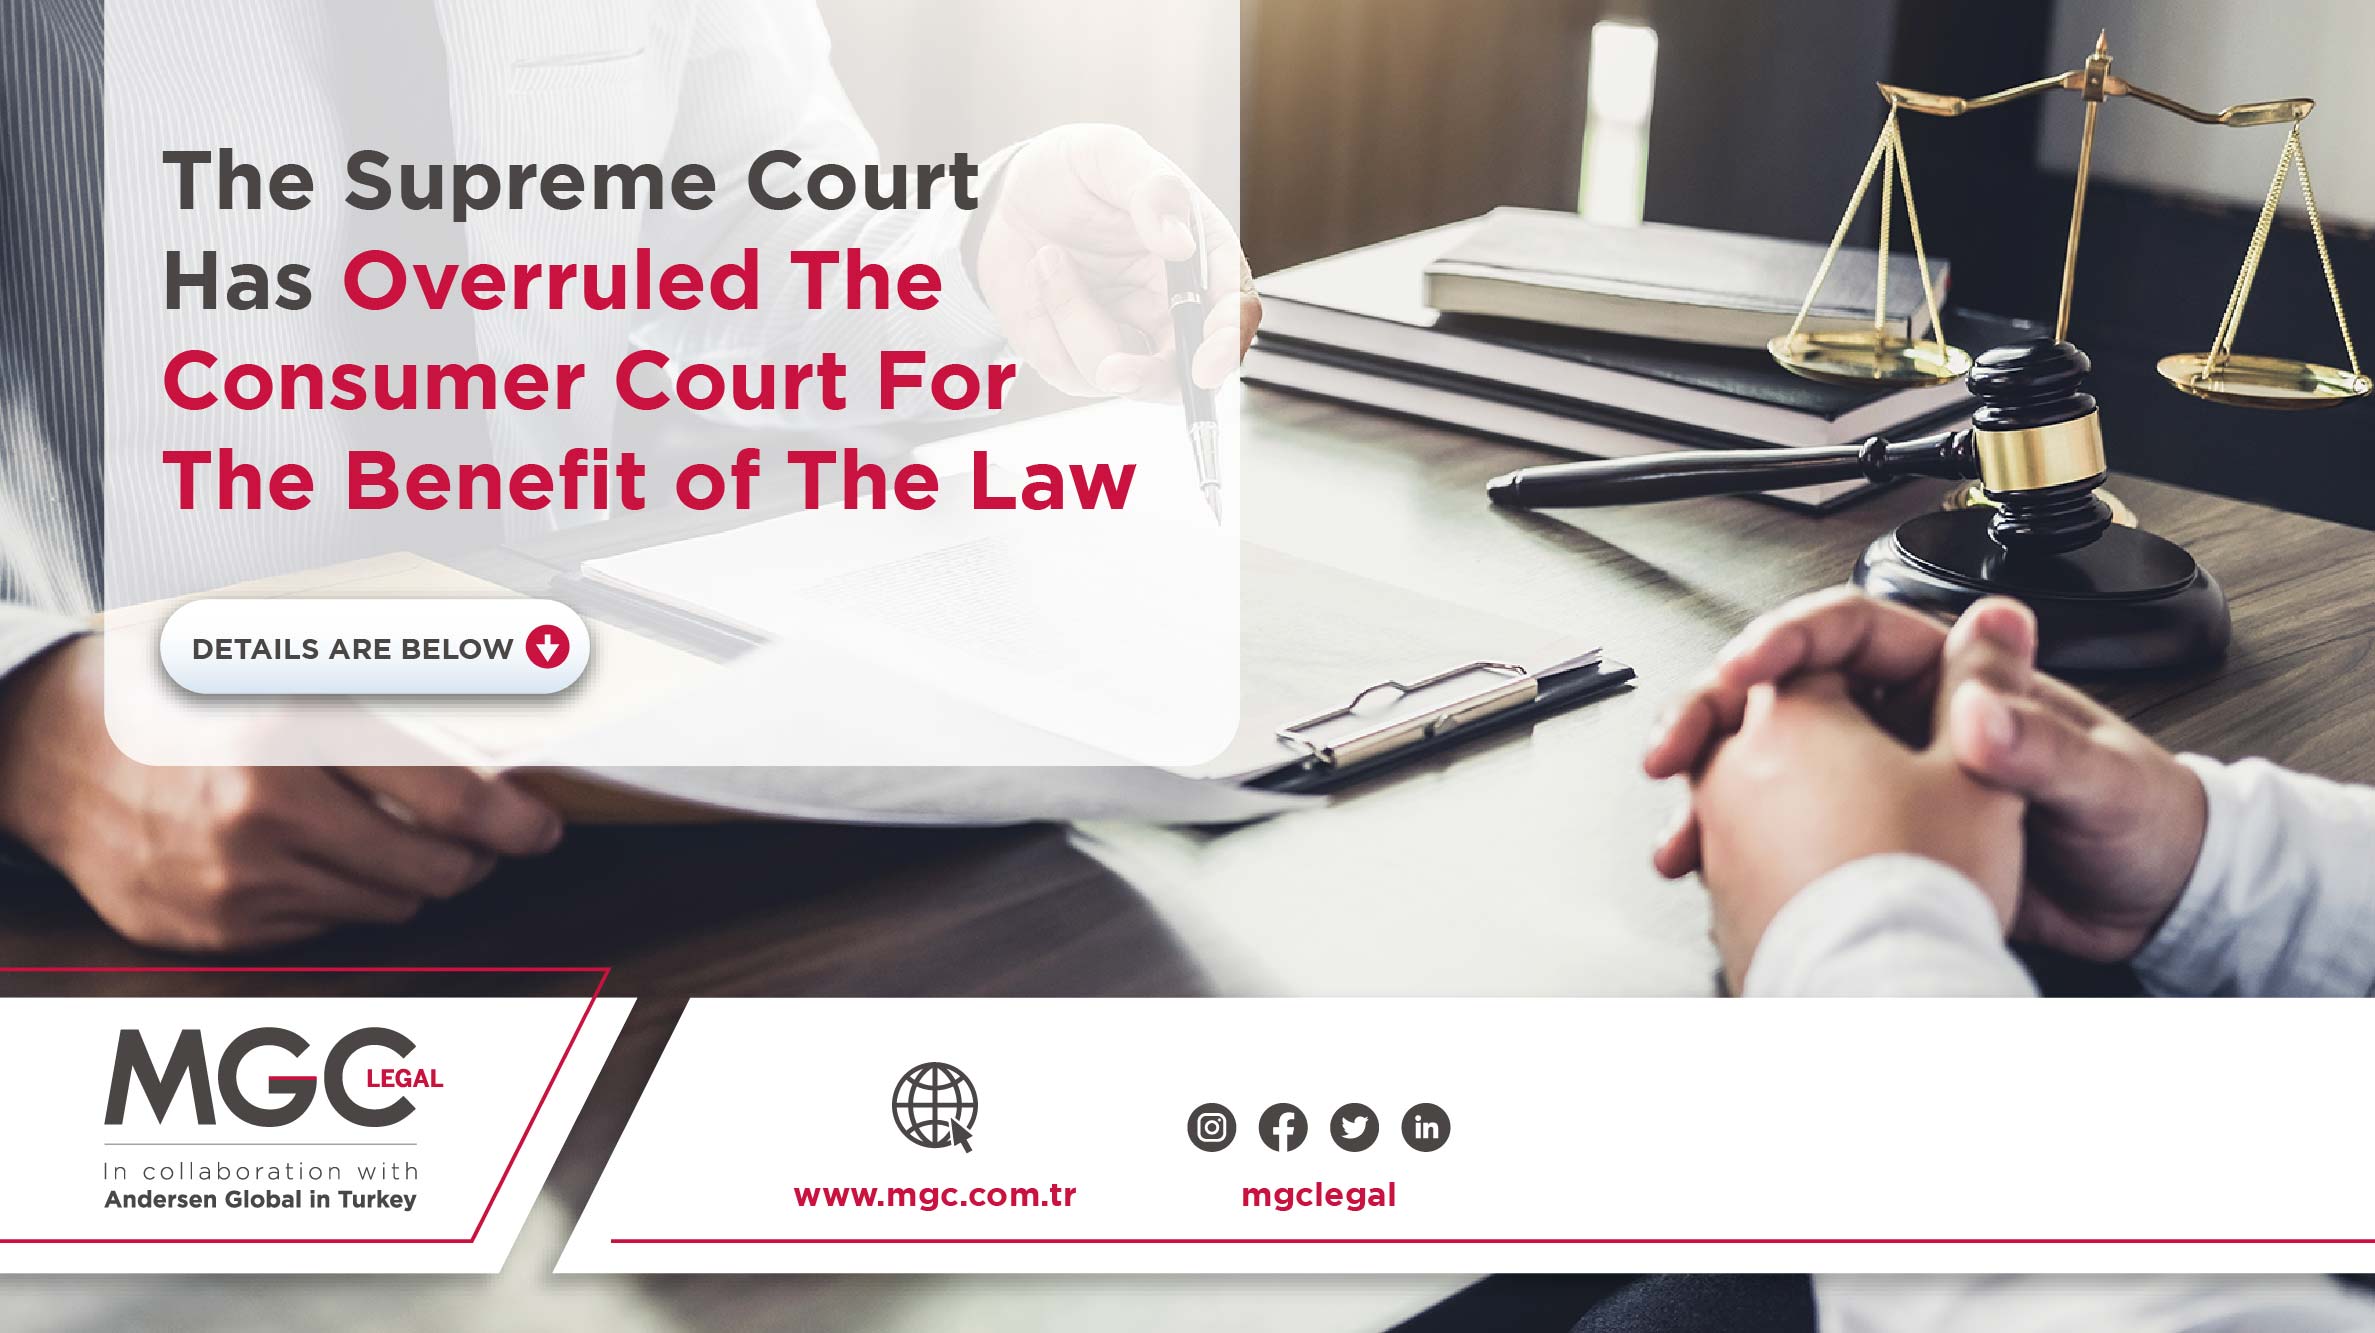 The Supreme Court Has Overruled The Consumer Court For The Benefit of The Law